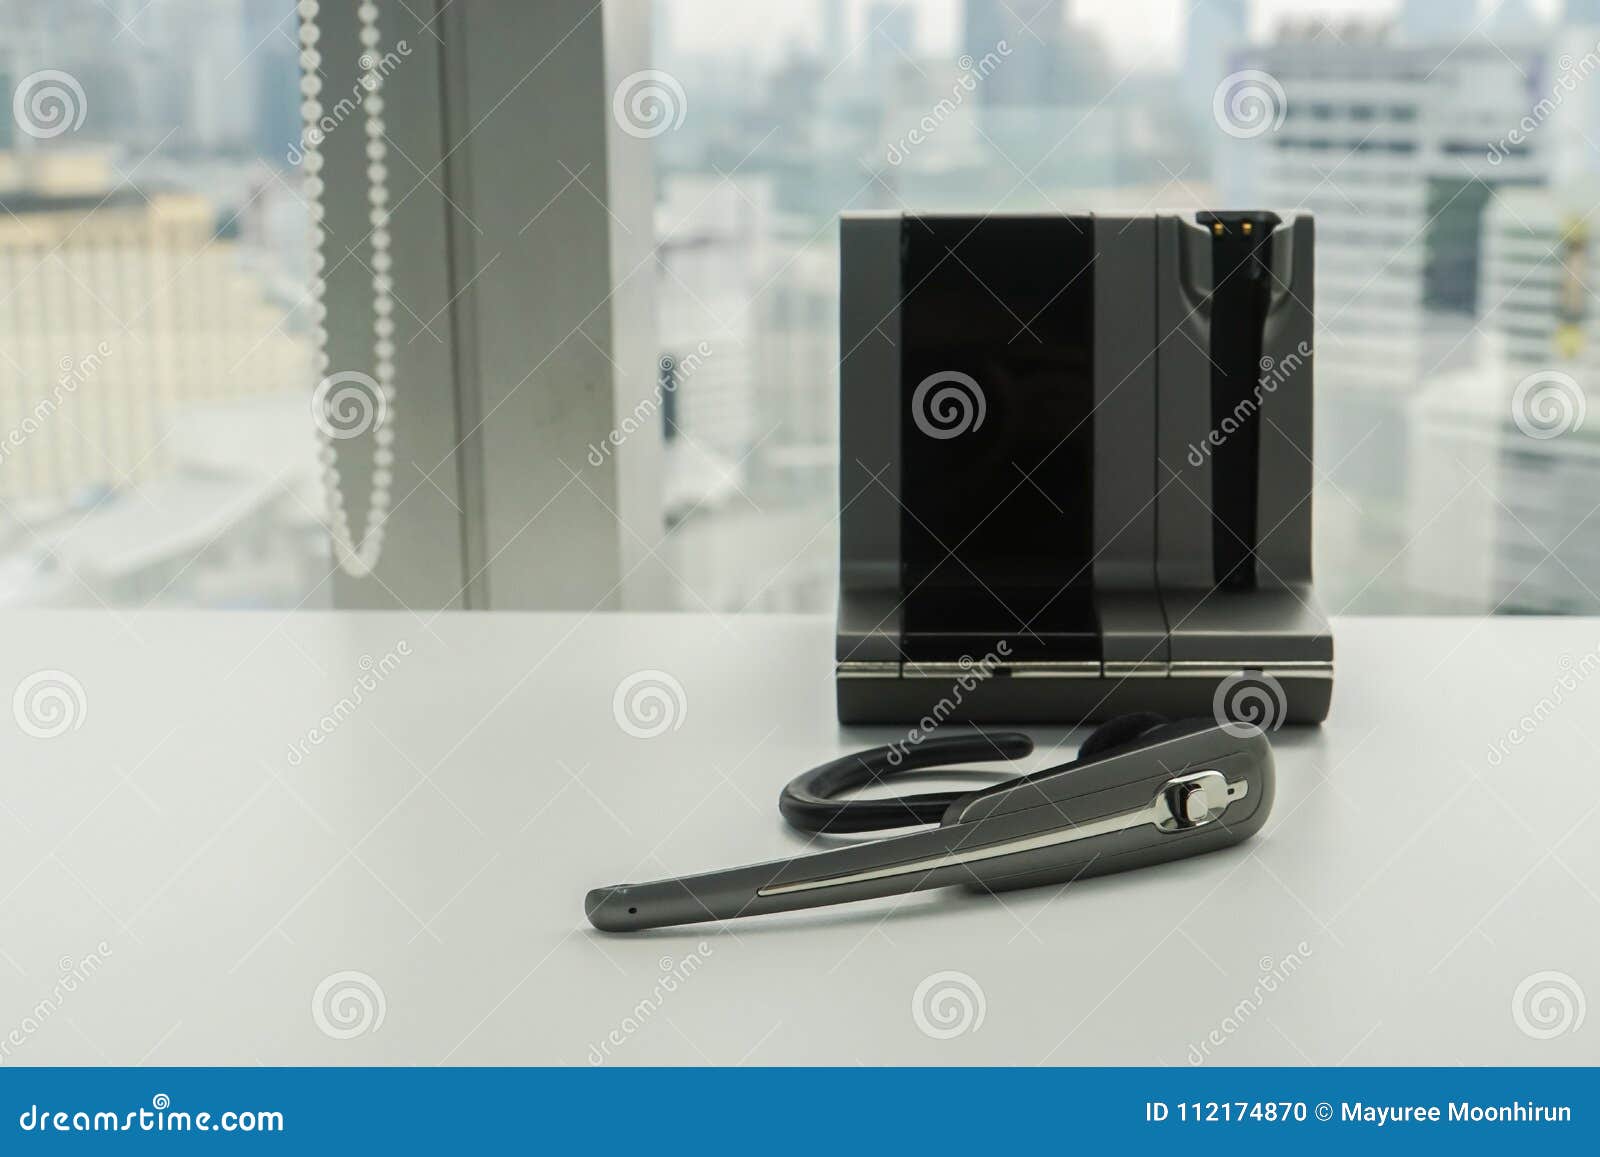 Wireless Headset On White Office Desk For Business Conference